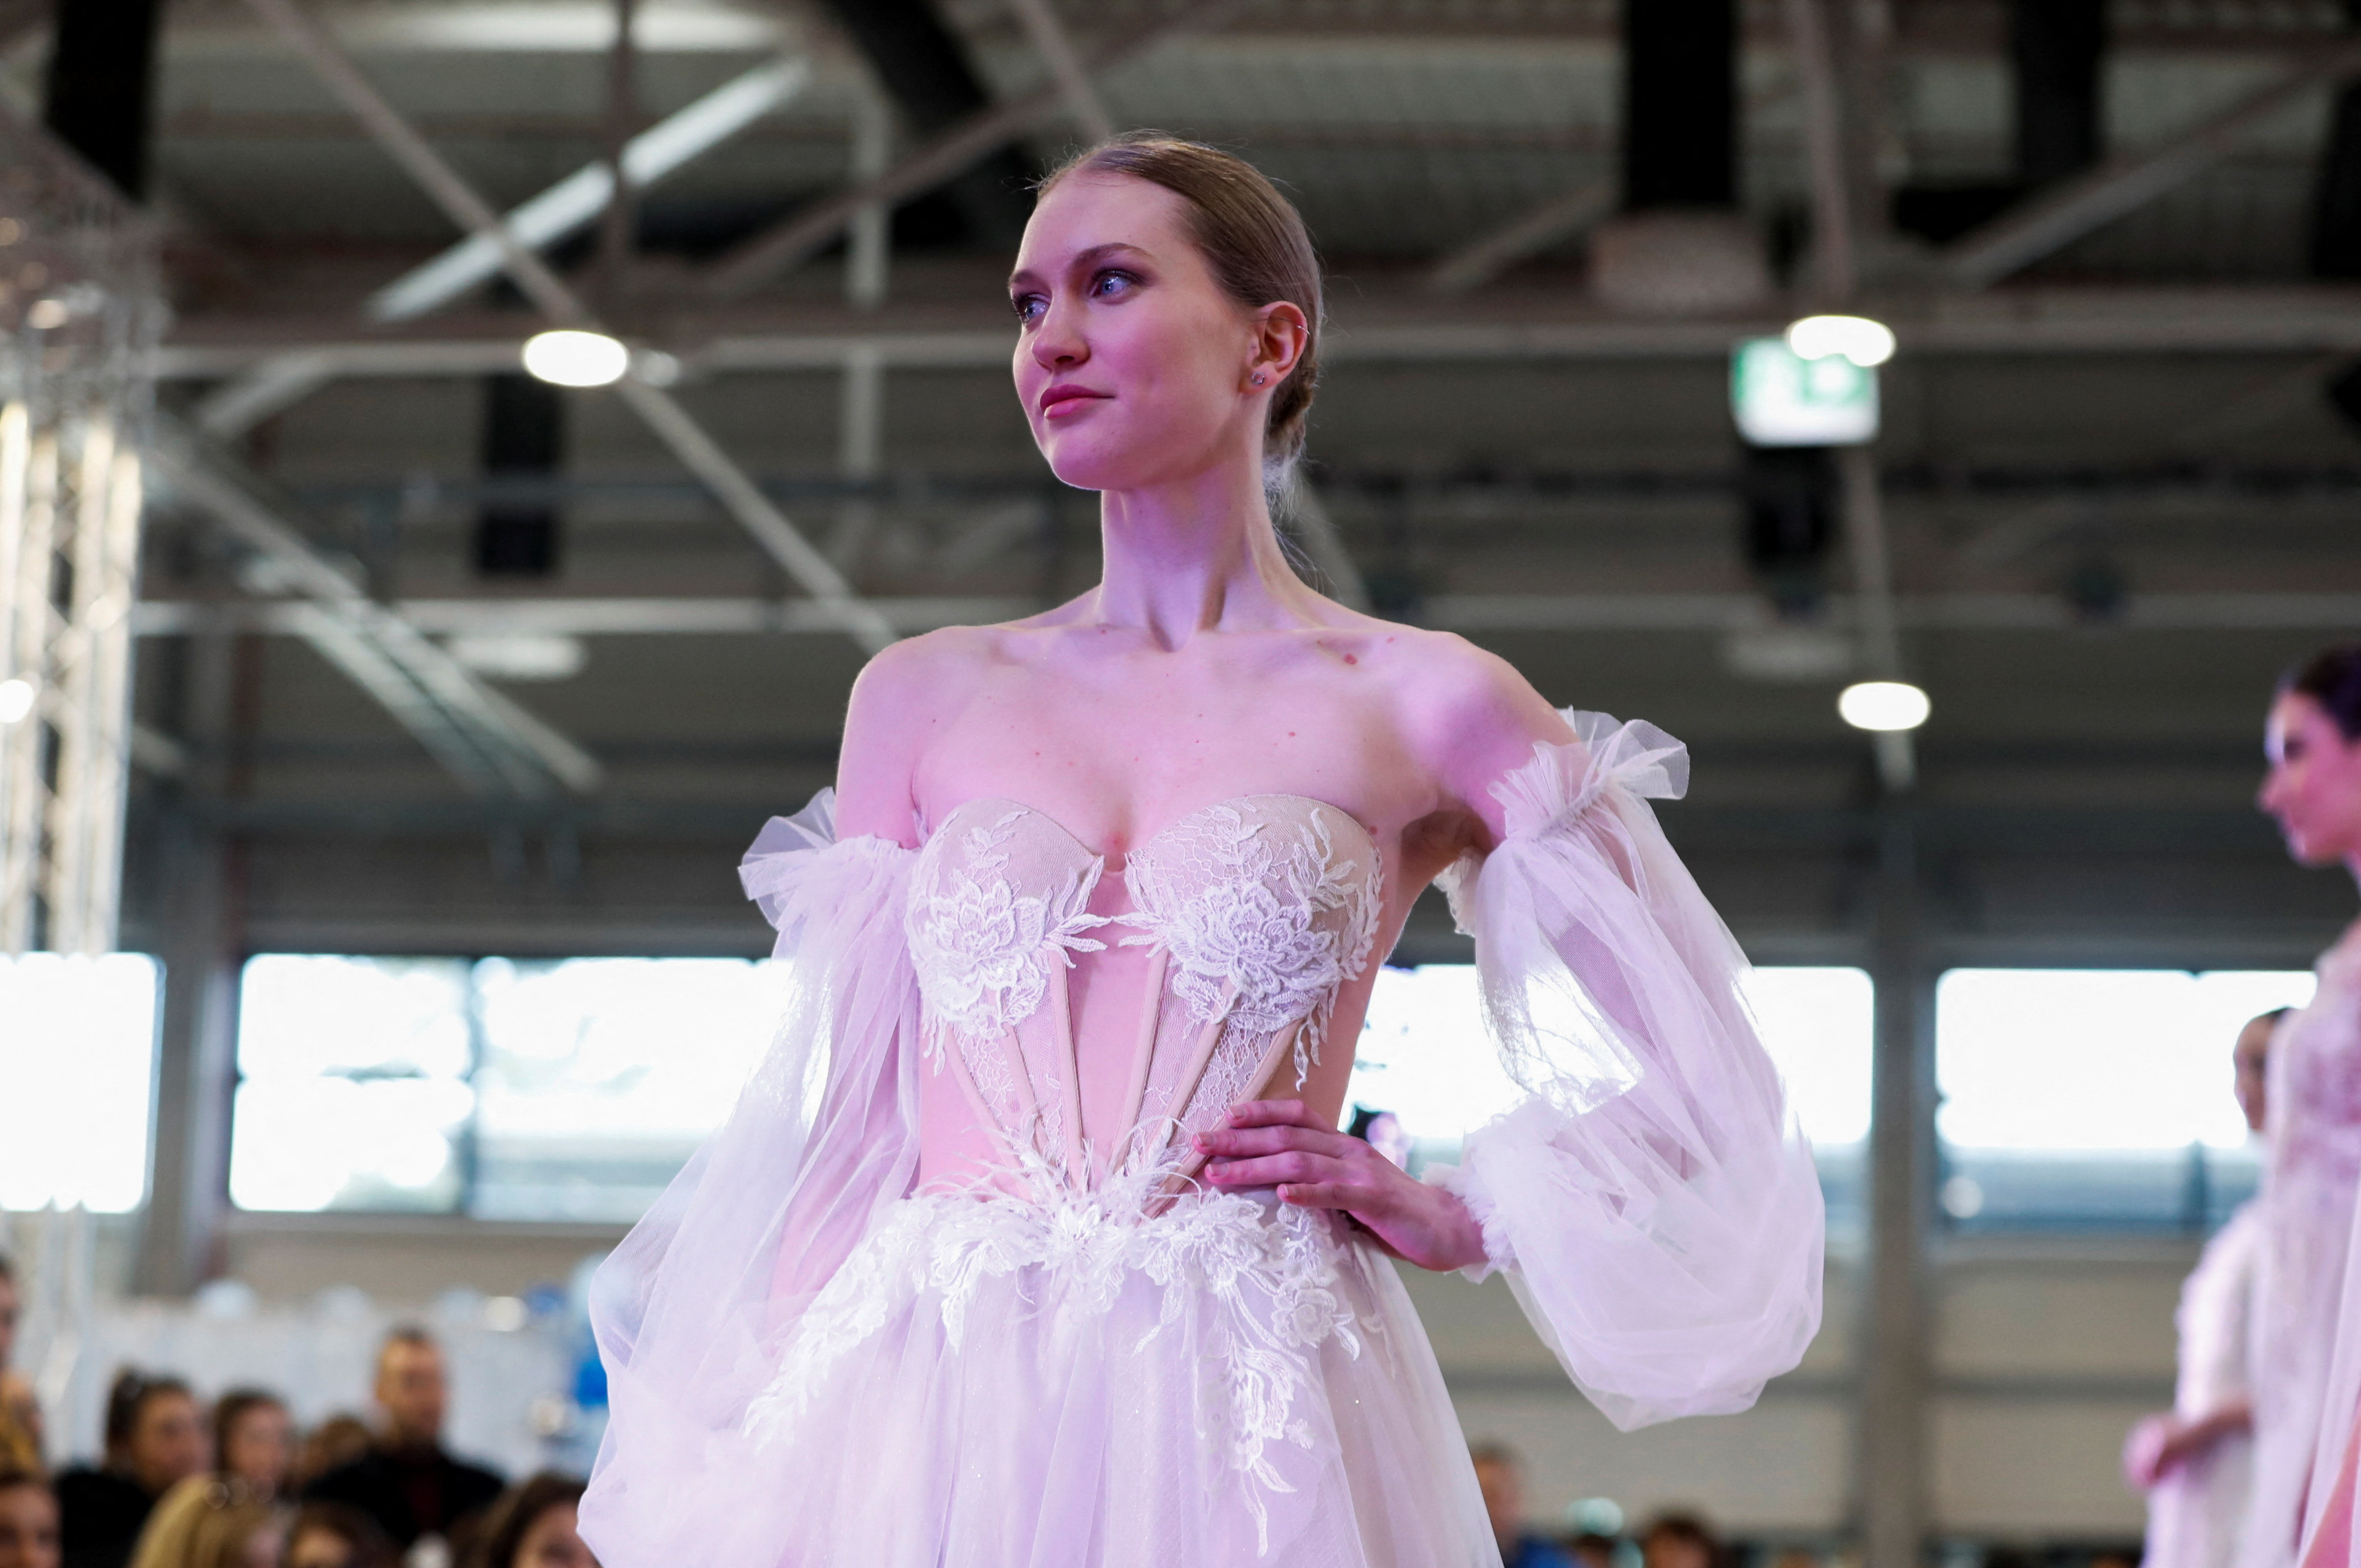 A model presents a wedding dress creation from Noriluca during the Central European Wedding Show in Budapest